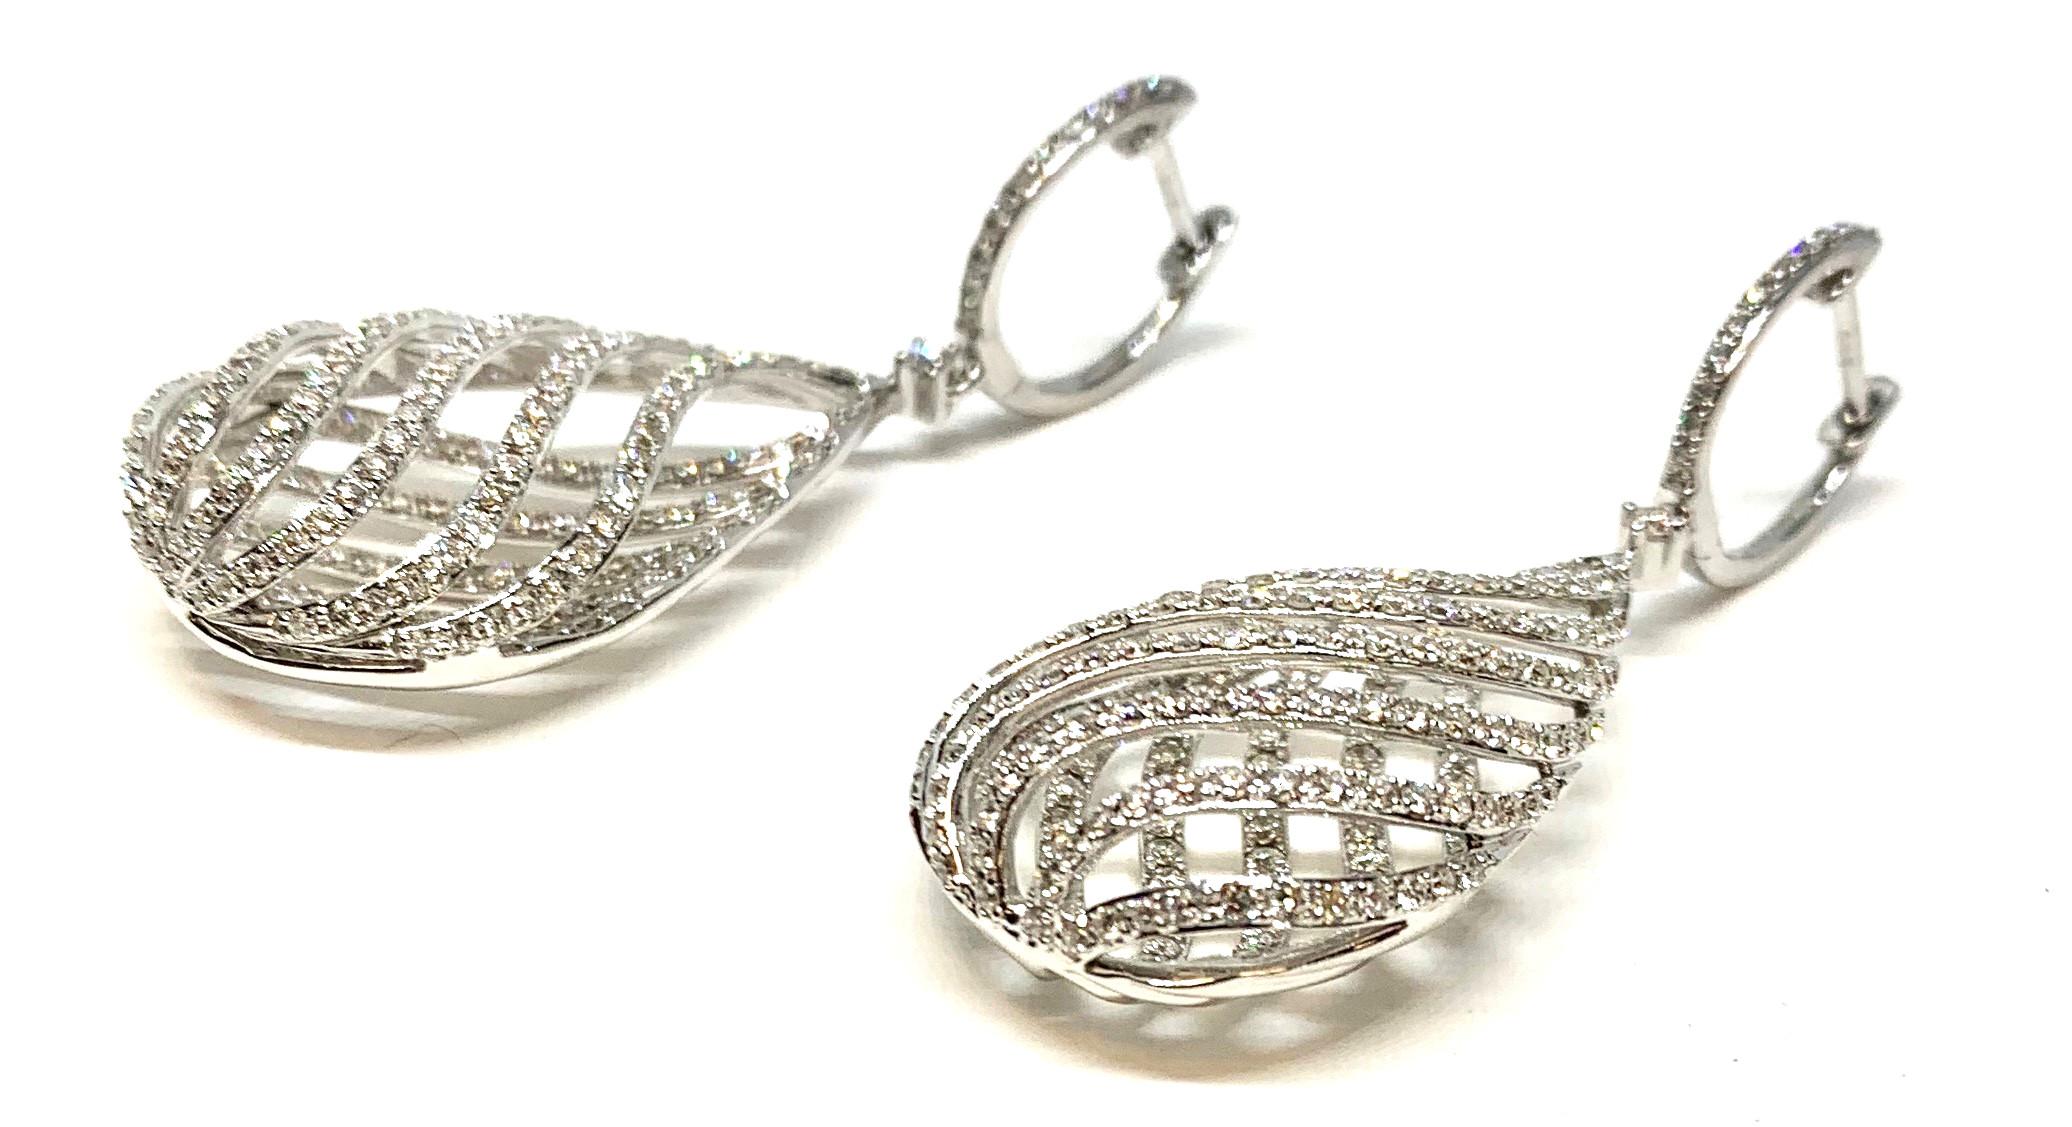 These large, pillowy, lattice design earrings are made of 18k white gold with lever backs and are set with over 3 carats of round brilliant cut diamonds. They are breathtaking, with an elegant and airy design makes them surprisingly lightweight and